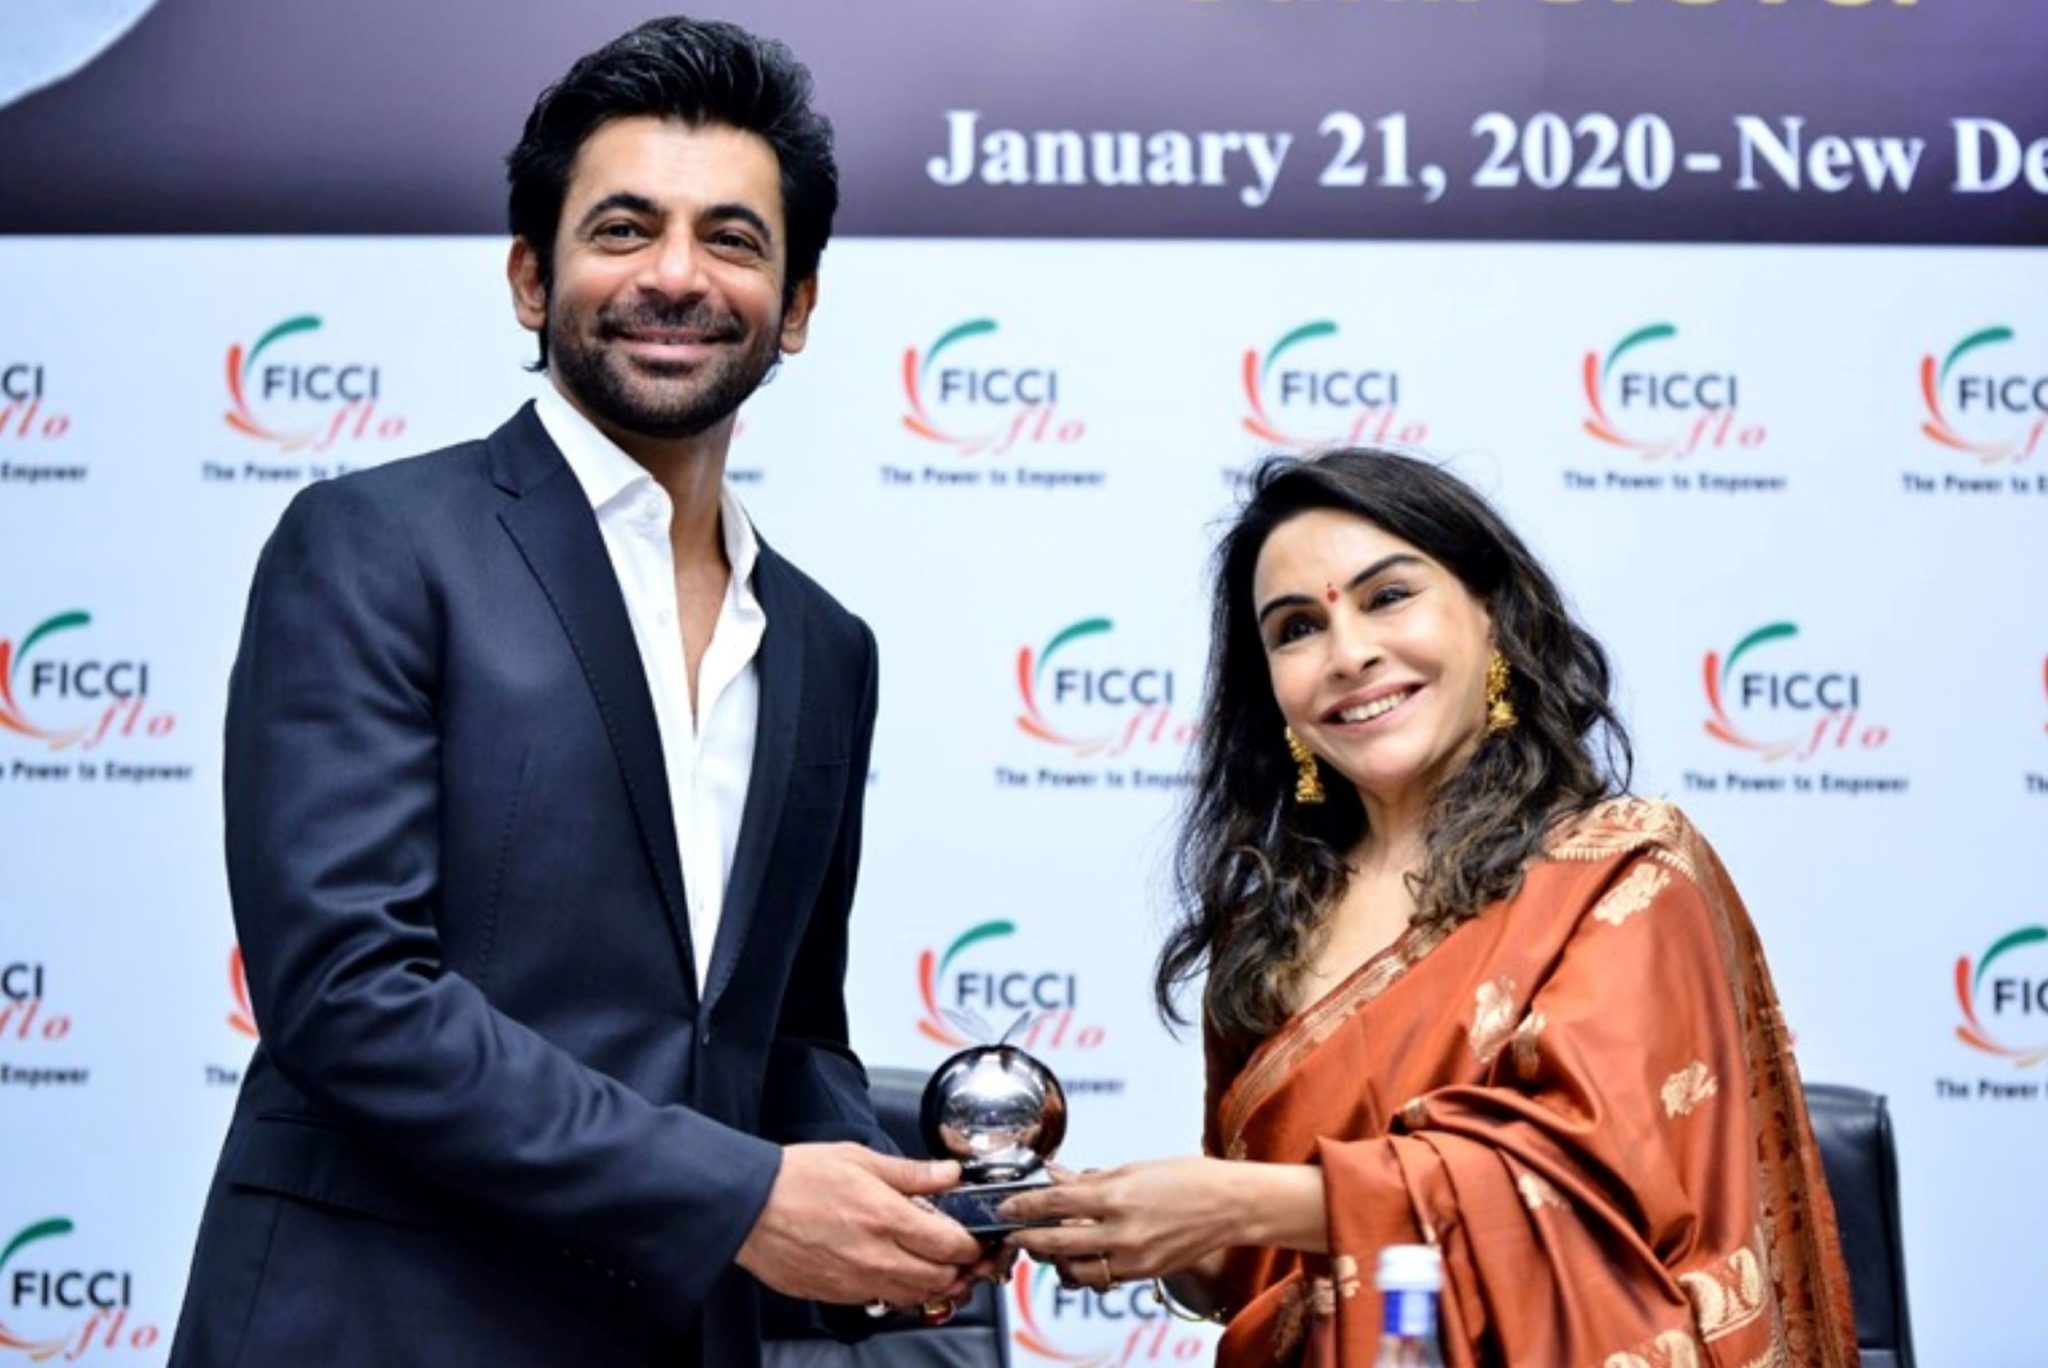 FLO’s hilarious date with Sunil Grover decoding=